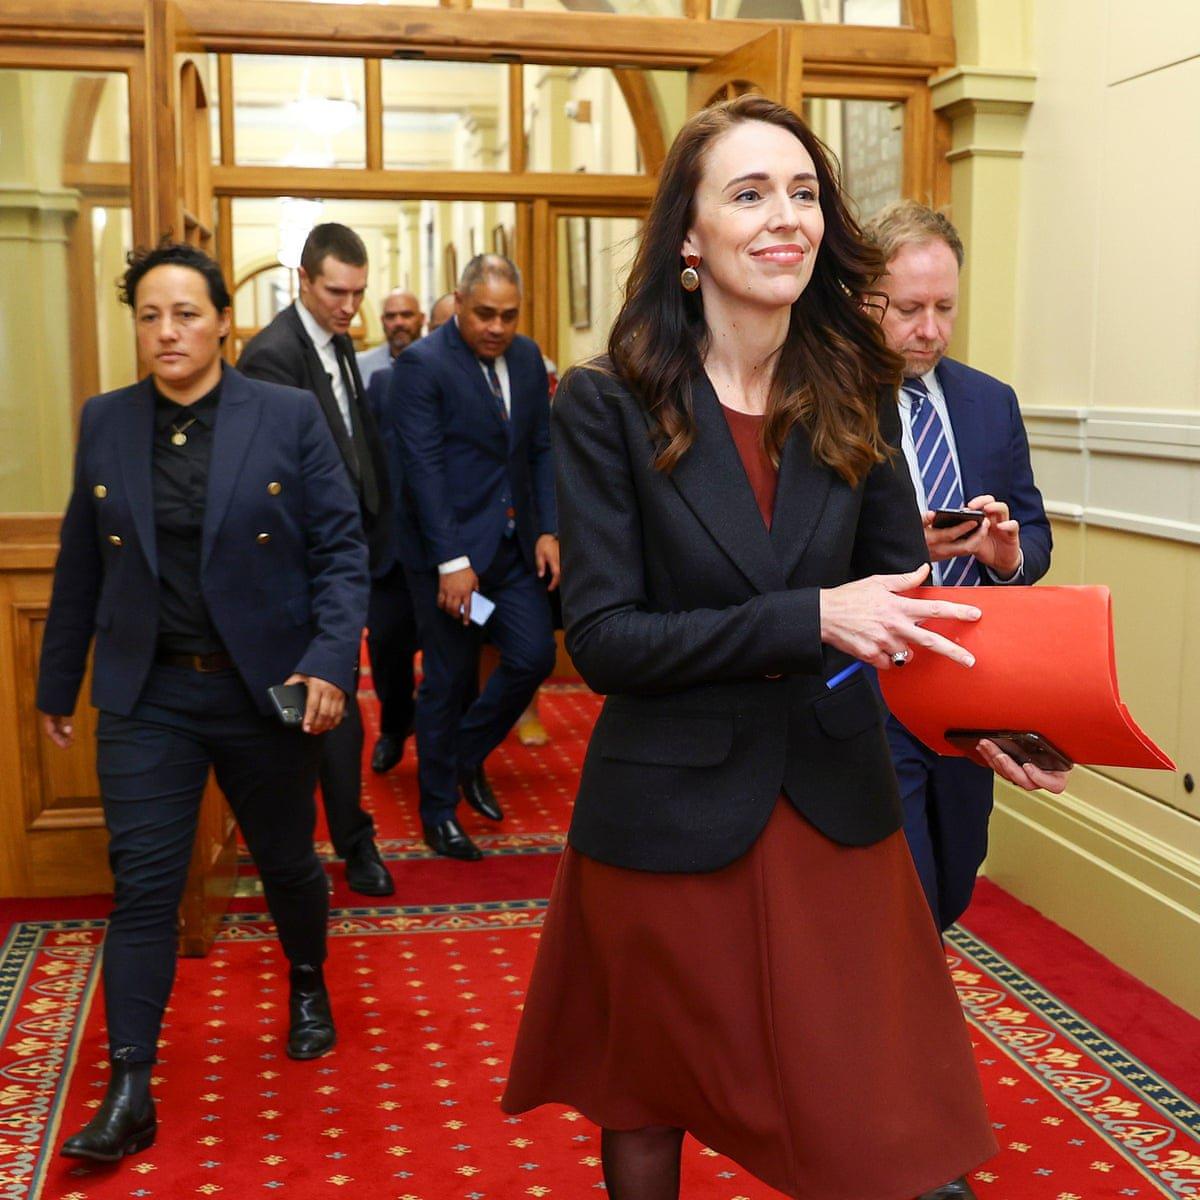 11. Who is the Indian-origin minister in Jacinda Ardern's Cabinet?